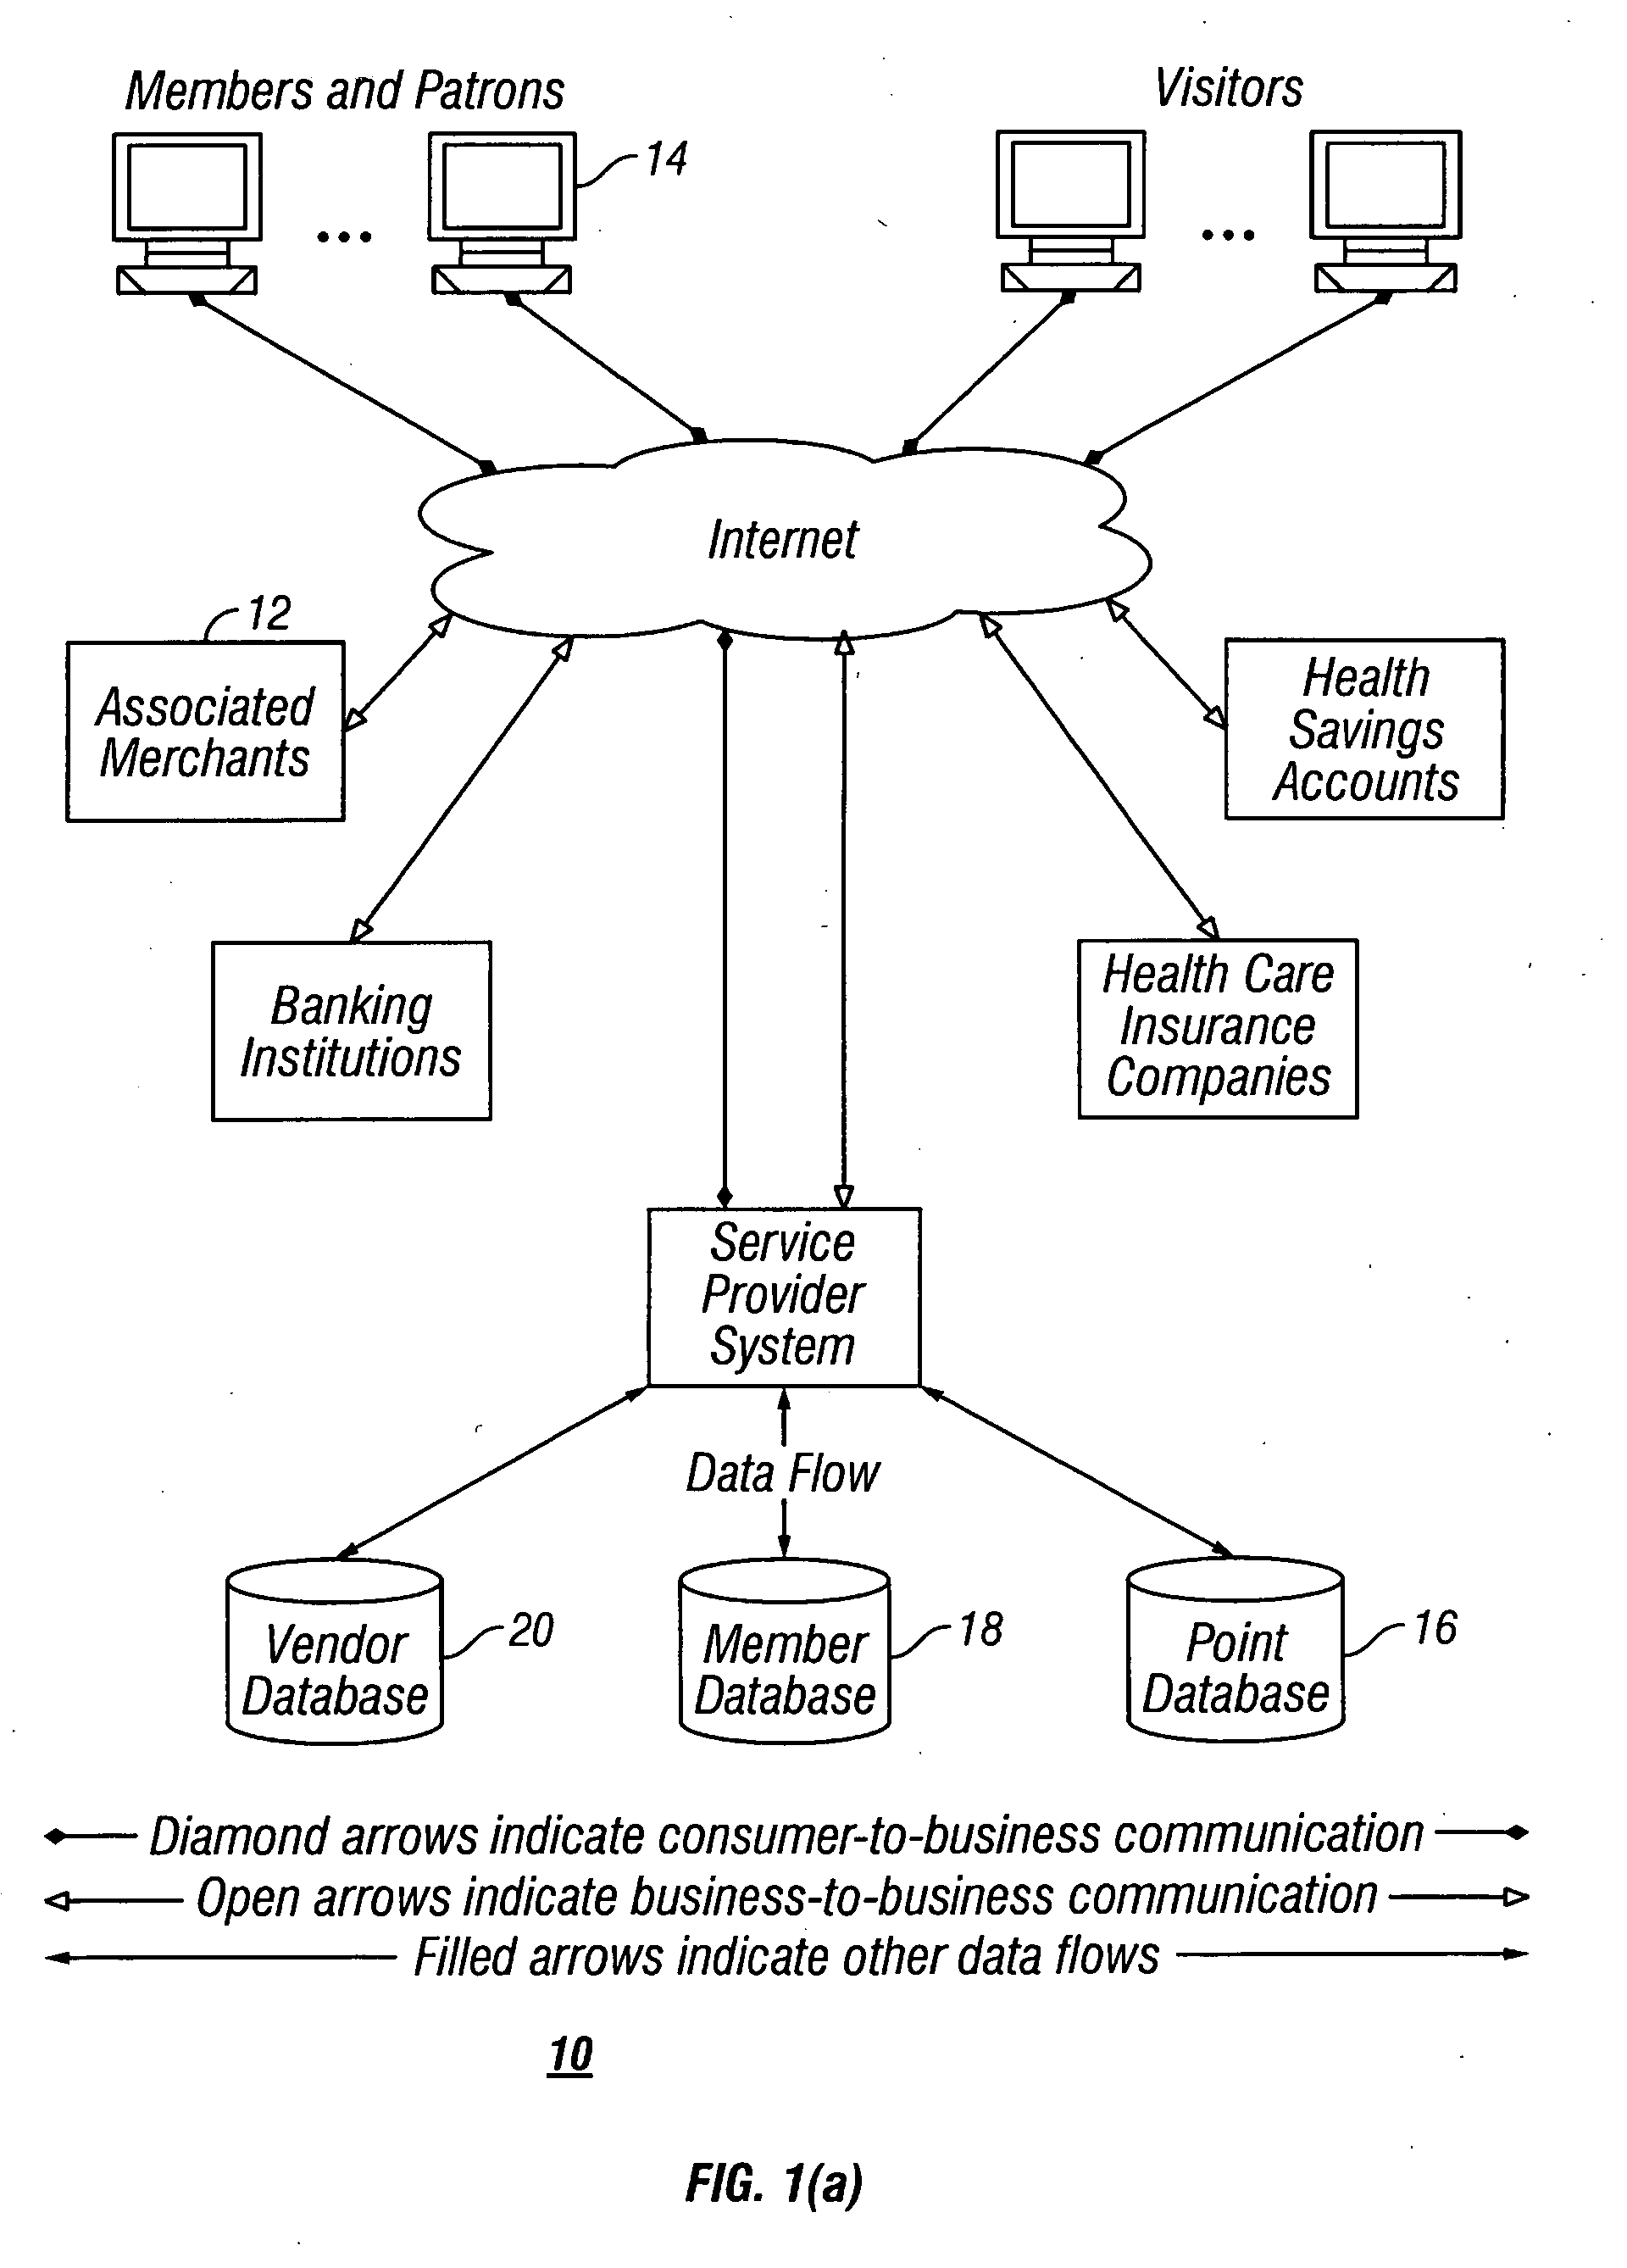 Systems and methods for consumers to purchase health care and related products